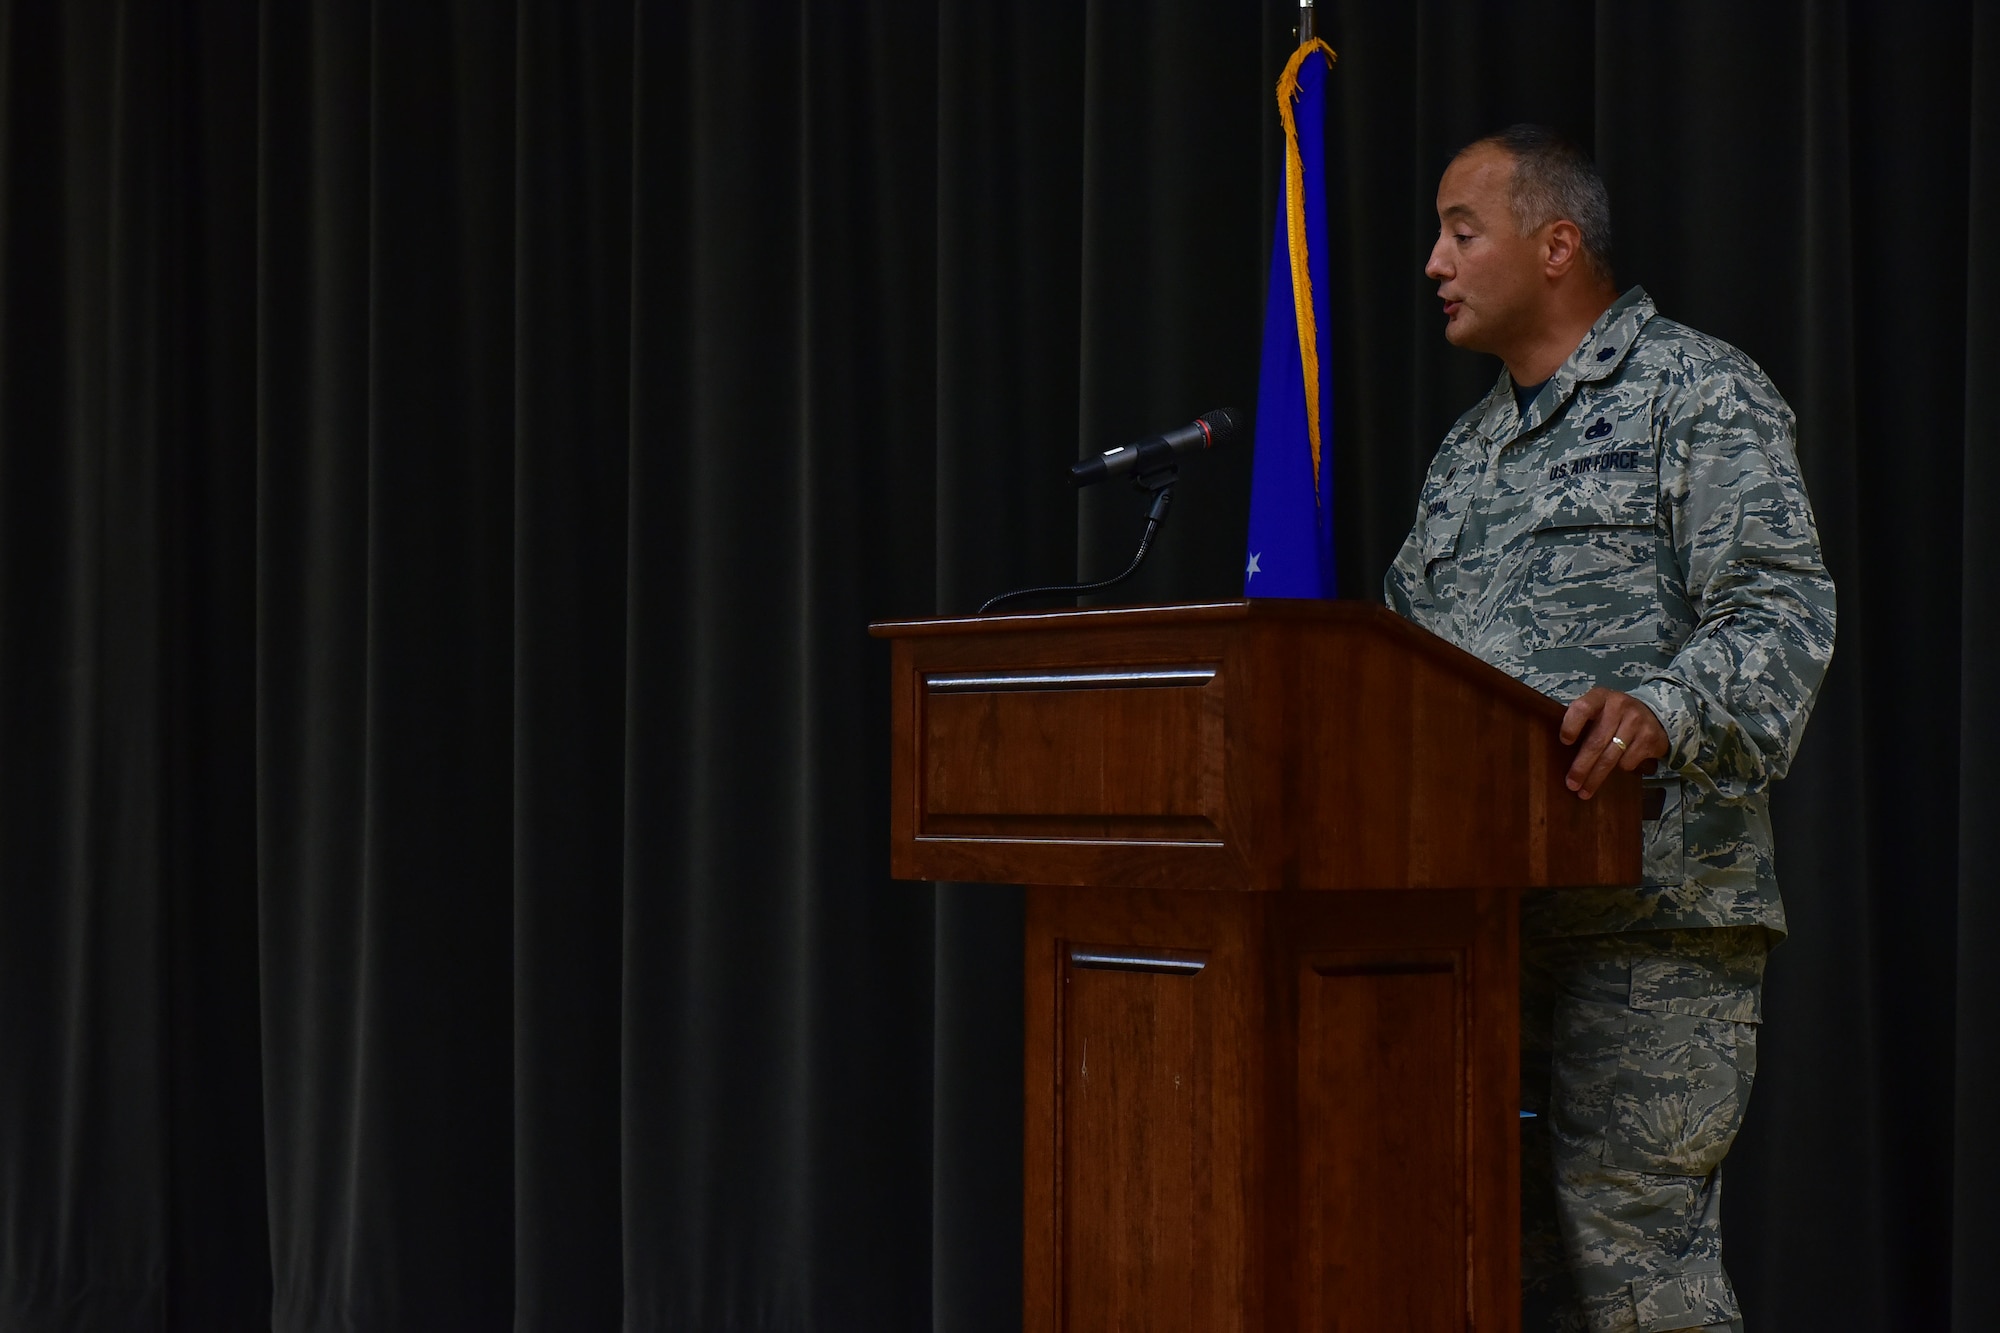 Lt. Col. Mark Chapa, 19th Maintenance Squadron commander, speaks on the impact of the Hispanic community throughout history at the Hispanic Heritage Month Info Fair Sept. 29, 2017, at Walter’s Community Support Center on Little Rock Air Force Base, Ark. The event educated Team Little Rock members on nationally recognized Hispanic countries. (U.S. Air Force photo by Airman Rhett Isbell)